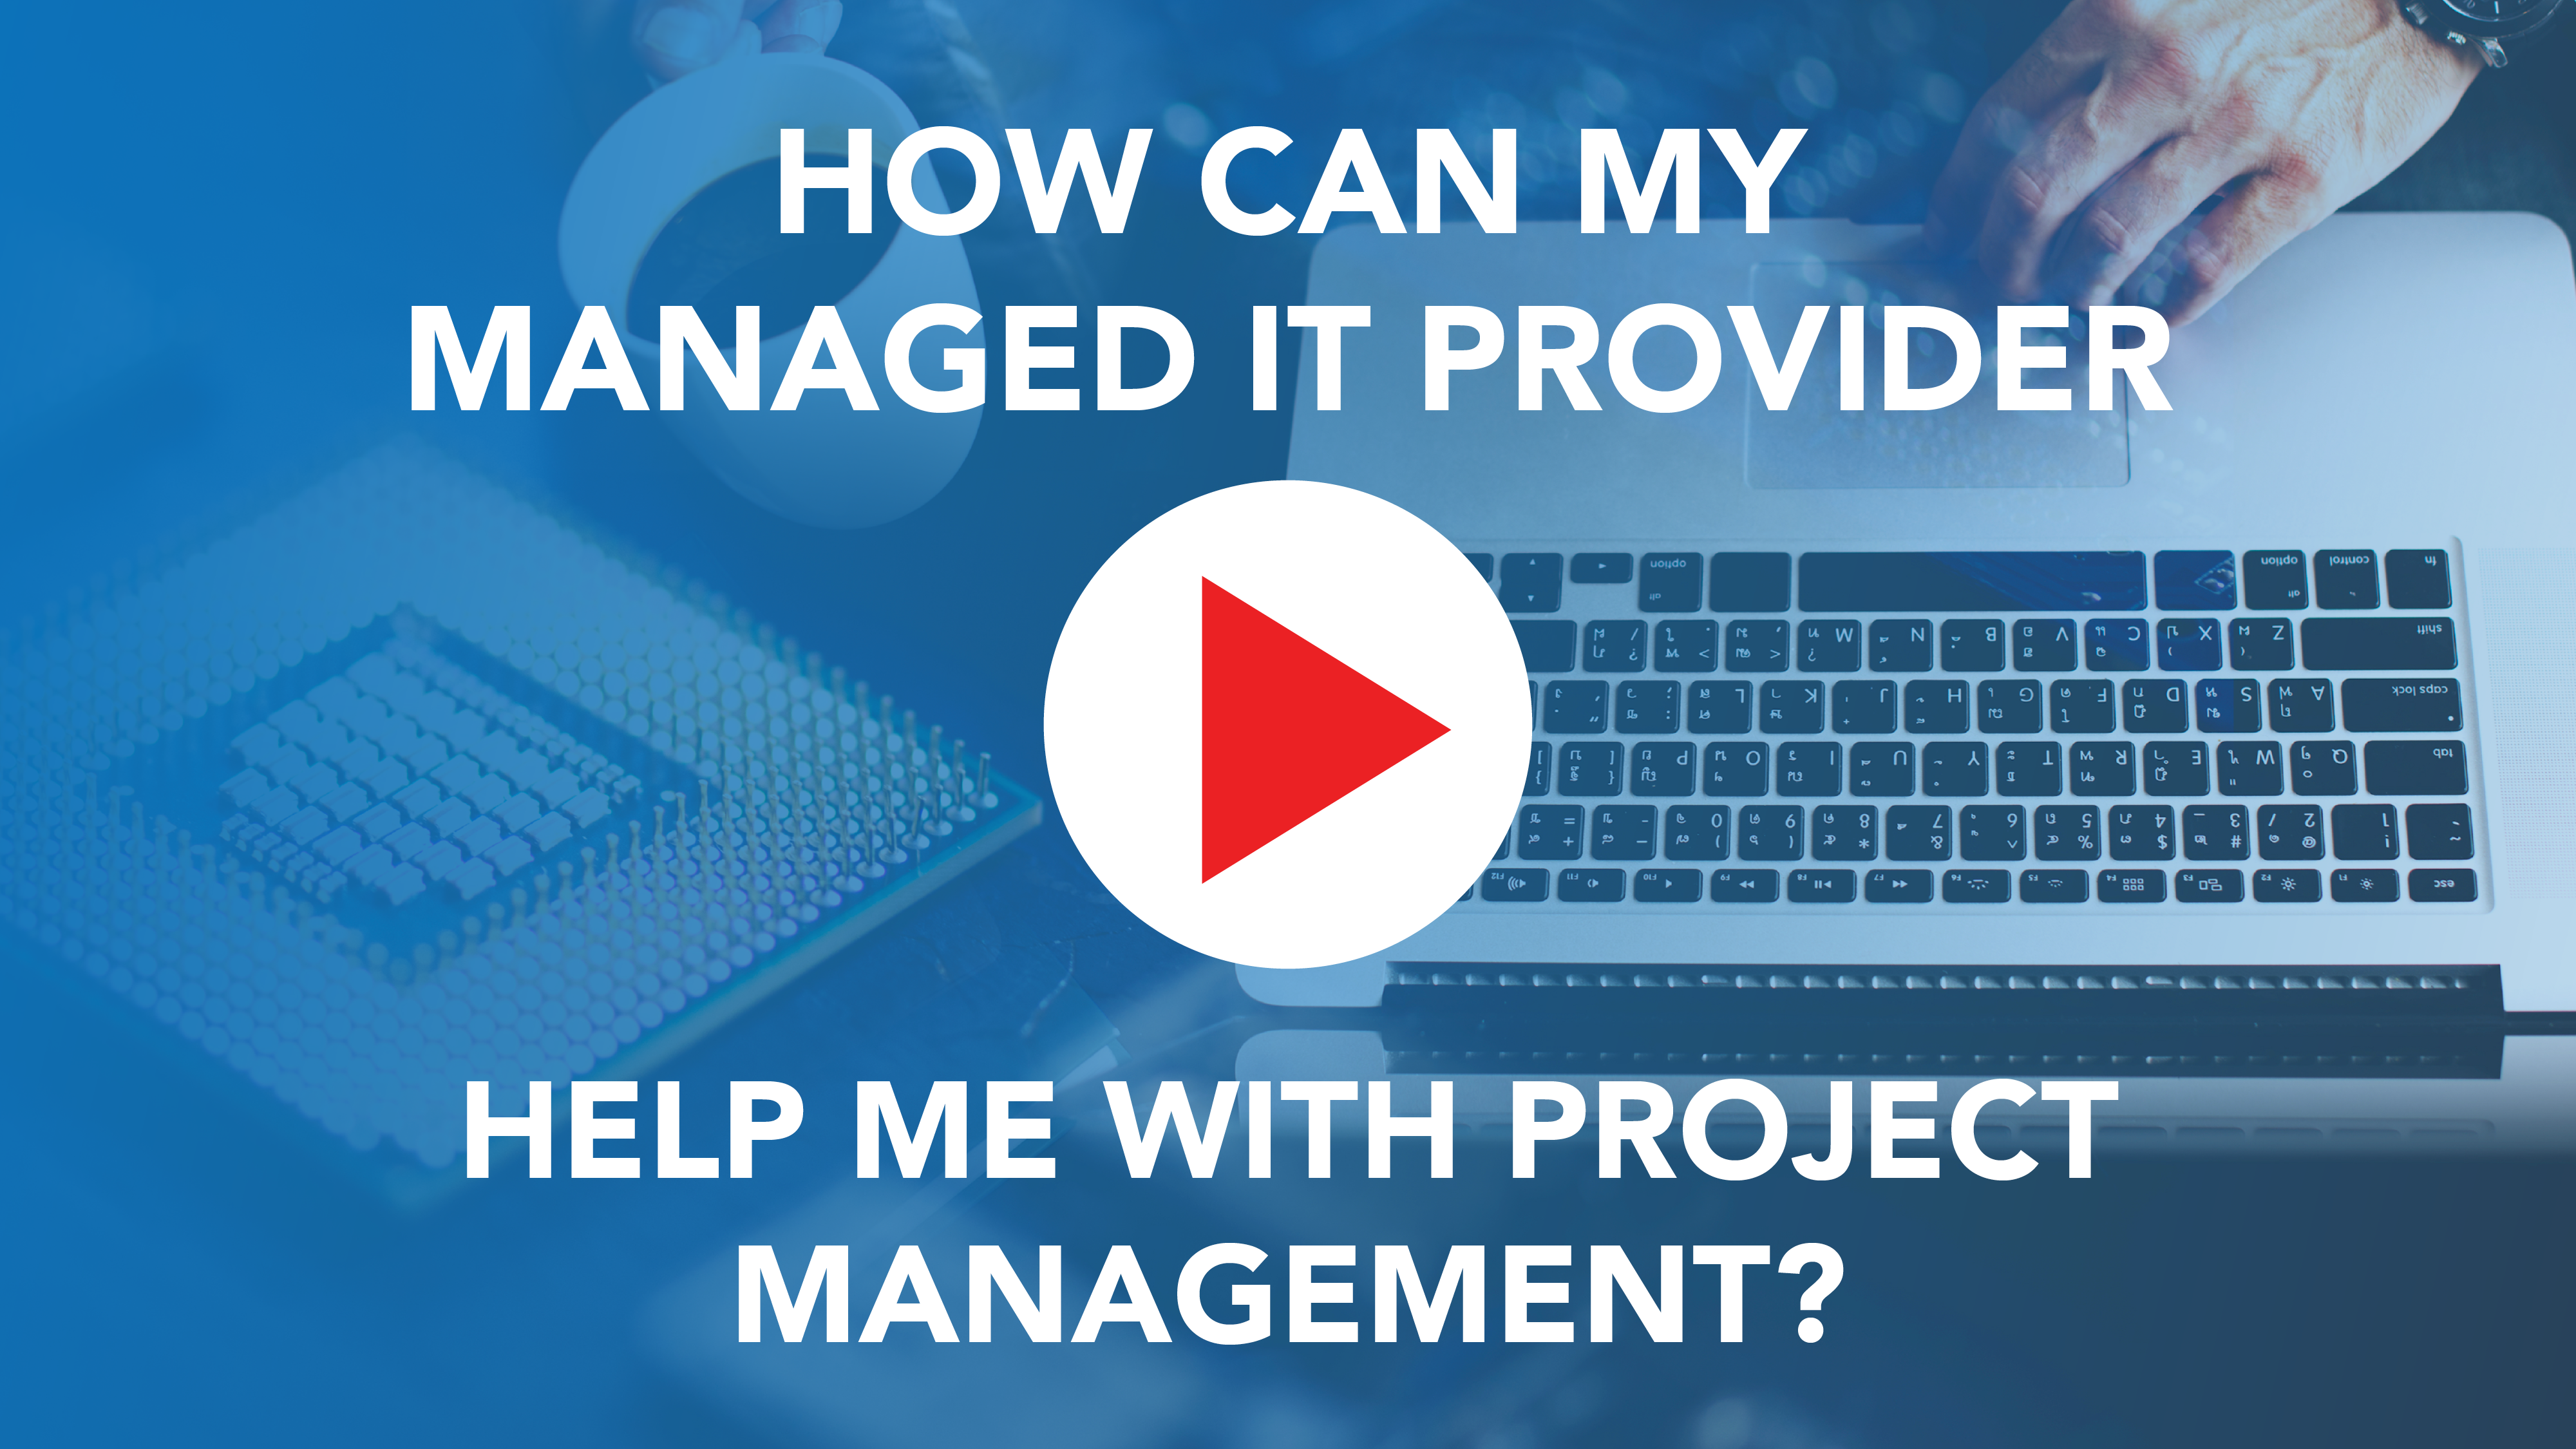 How Can My Managed IT Provider Help Me With Project Management?